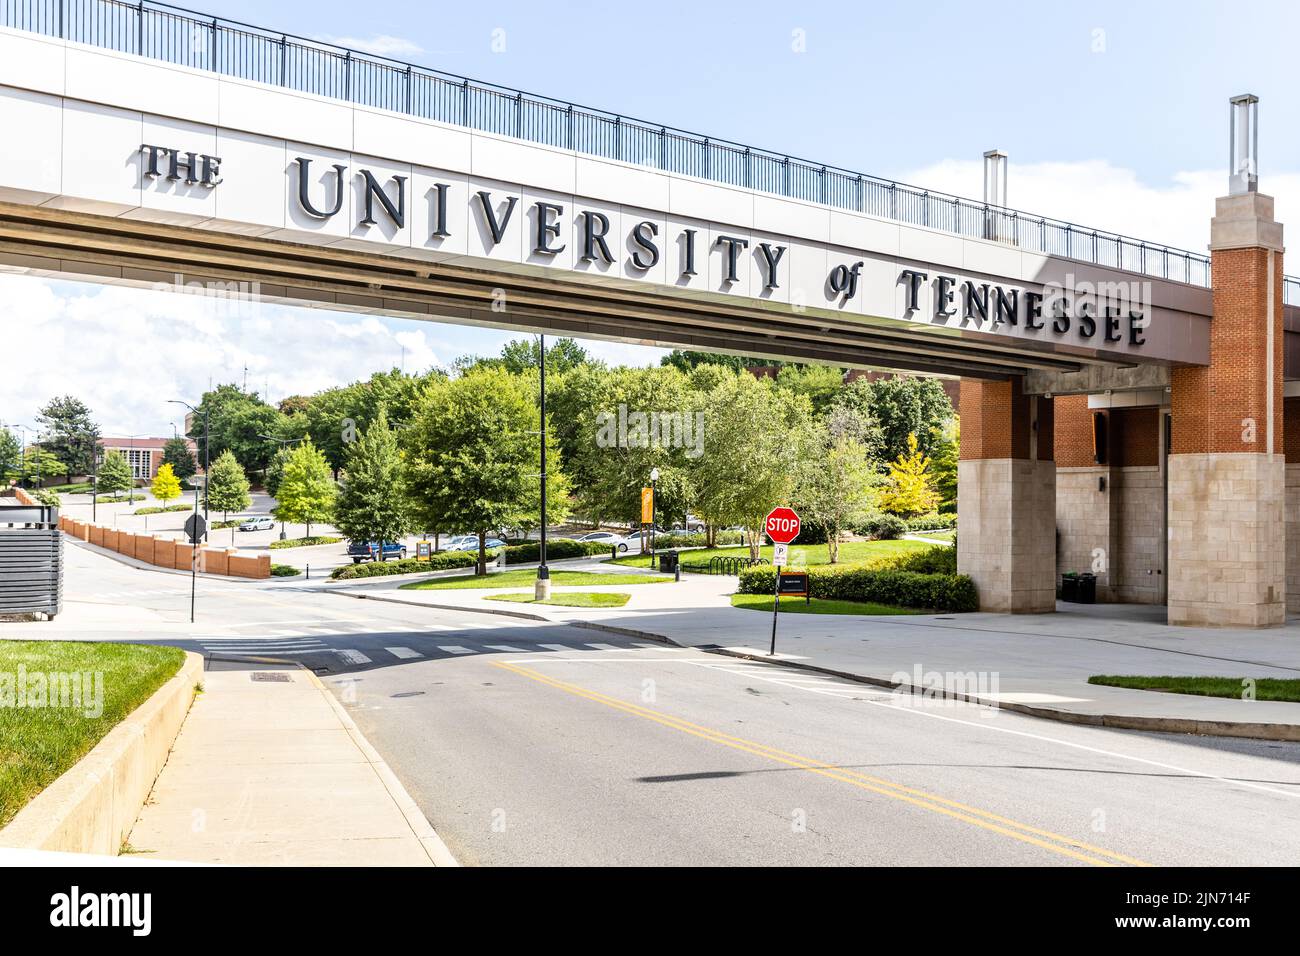 The University of Tennessee's campus is located in downtown Knoxville, TN and was founded in 1794. Stock Photo